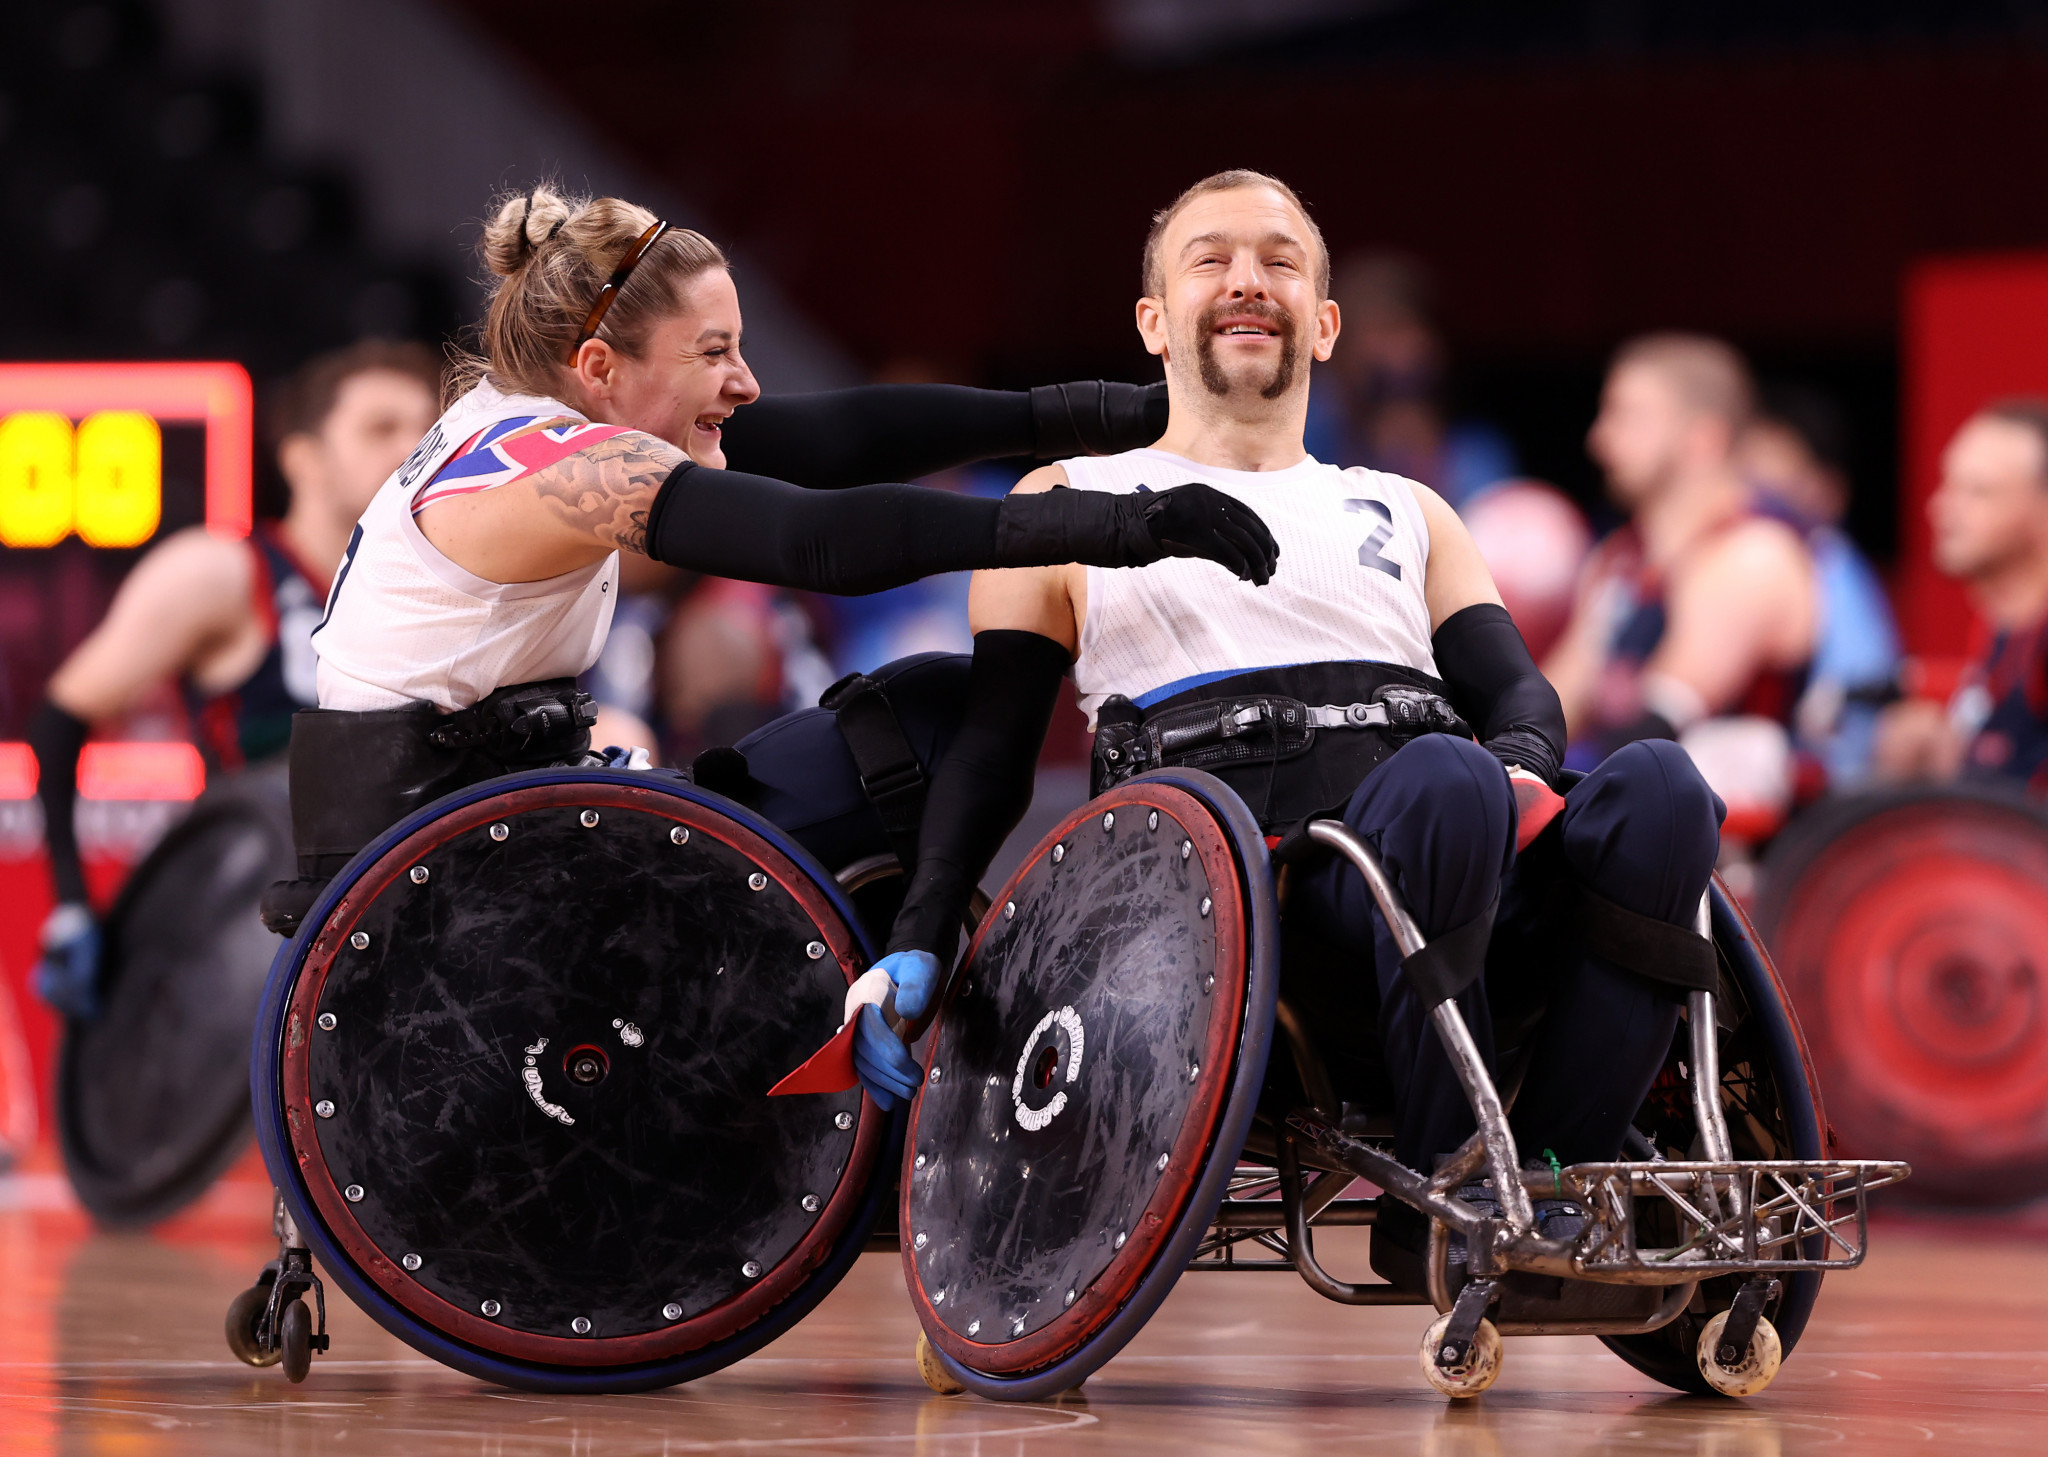 Brisbane says British wheelchair rugby has "come a very long way" since London 2012